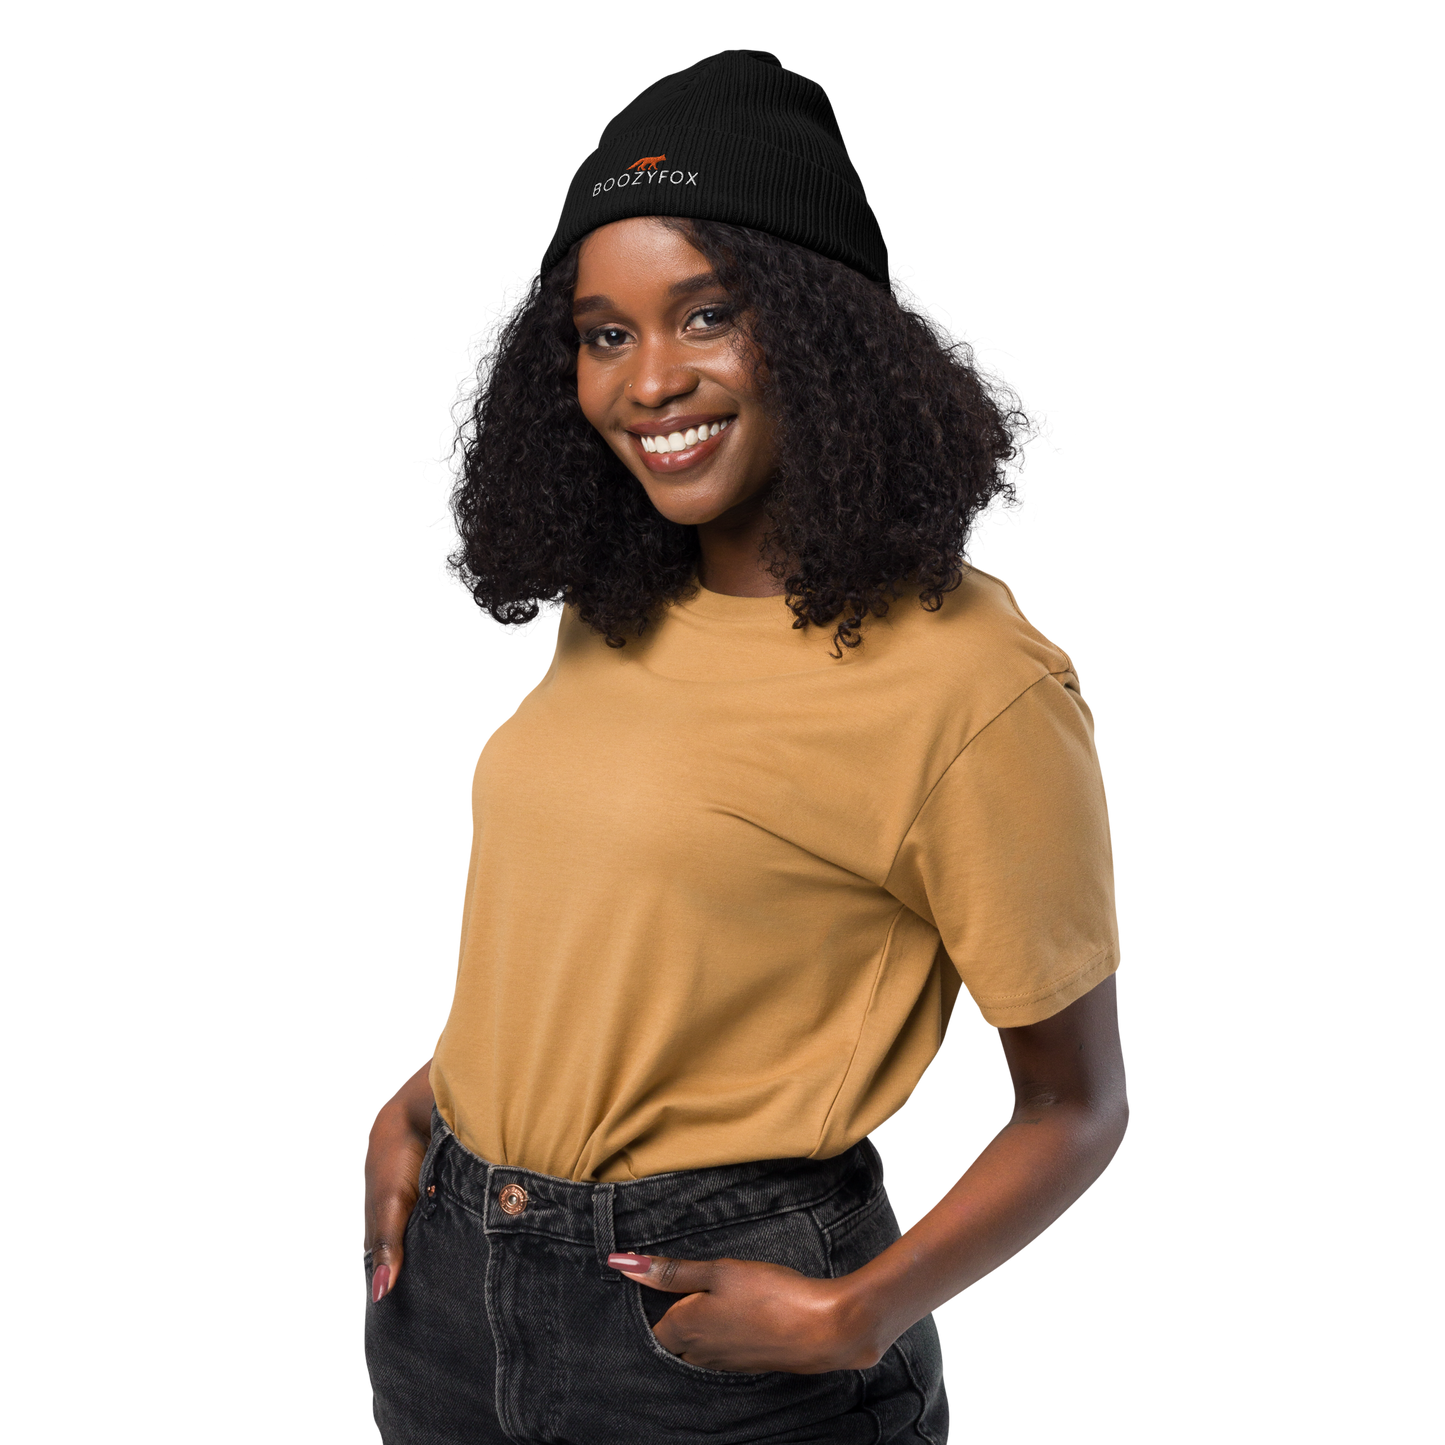 Smiling woman wearing a Black Organic Ribbed Beanie With An Embroidered Boozy Fox Logo On Fold - Shop Organic Cotton Beanies Online - Boozy Fox